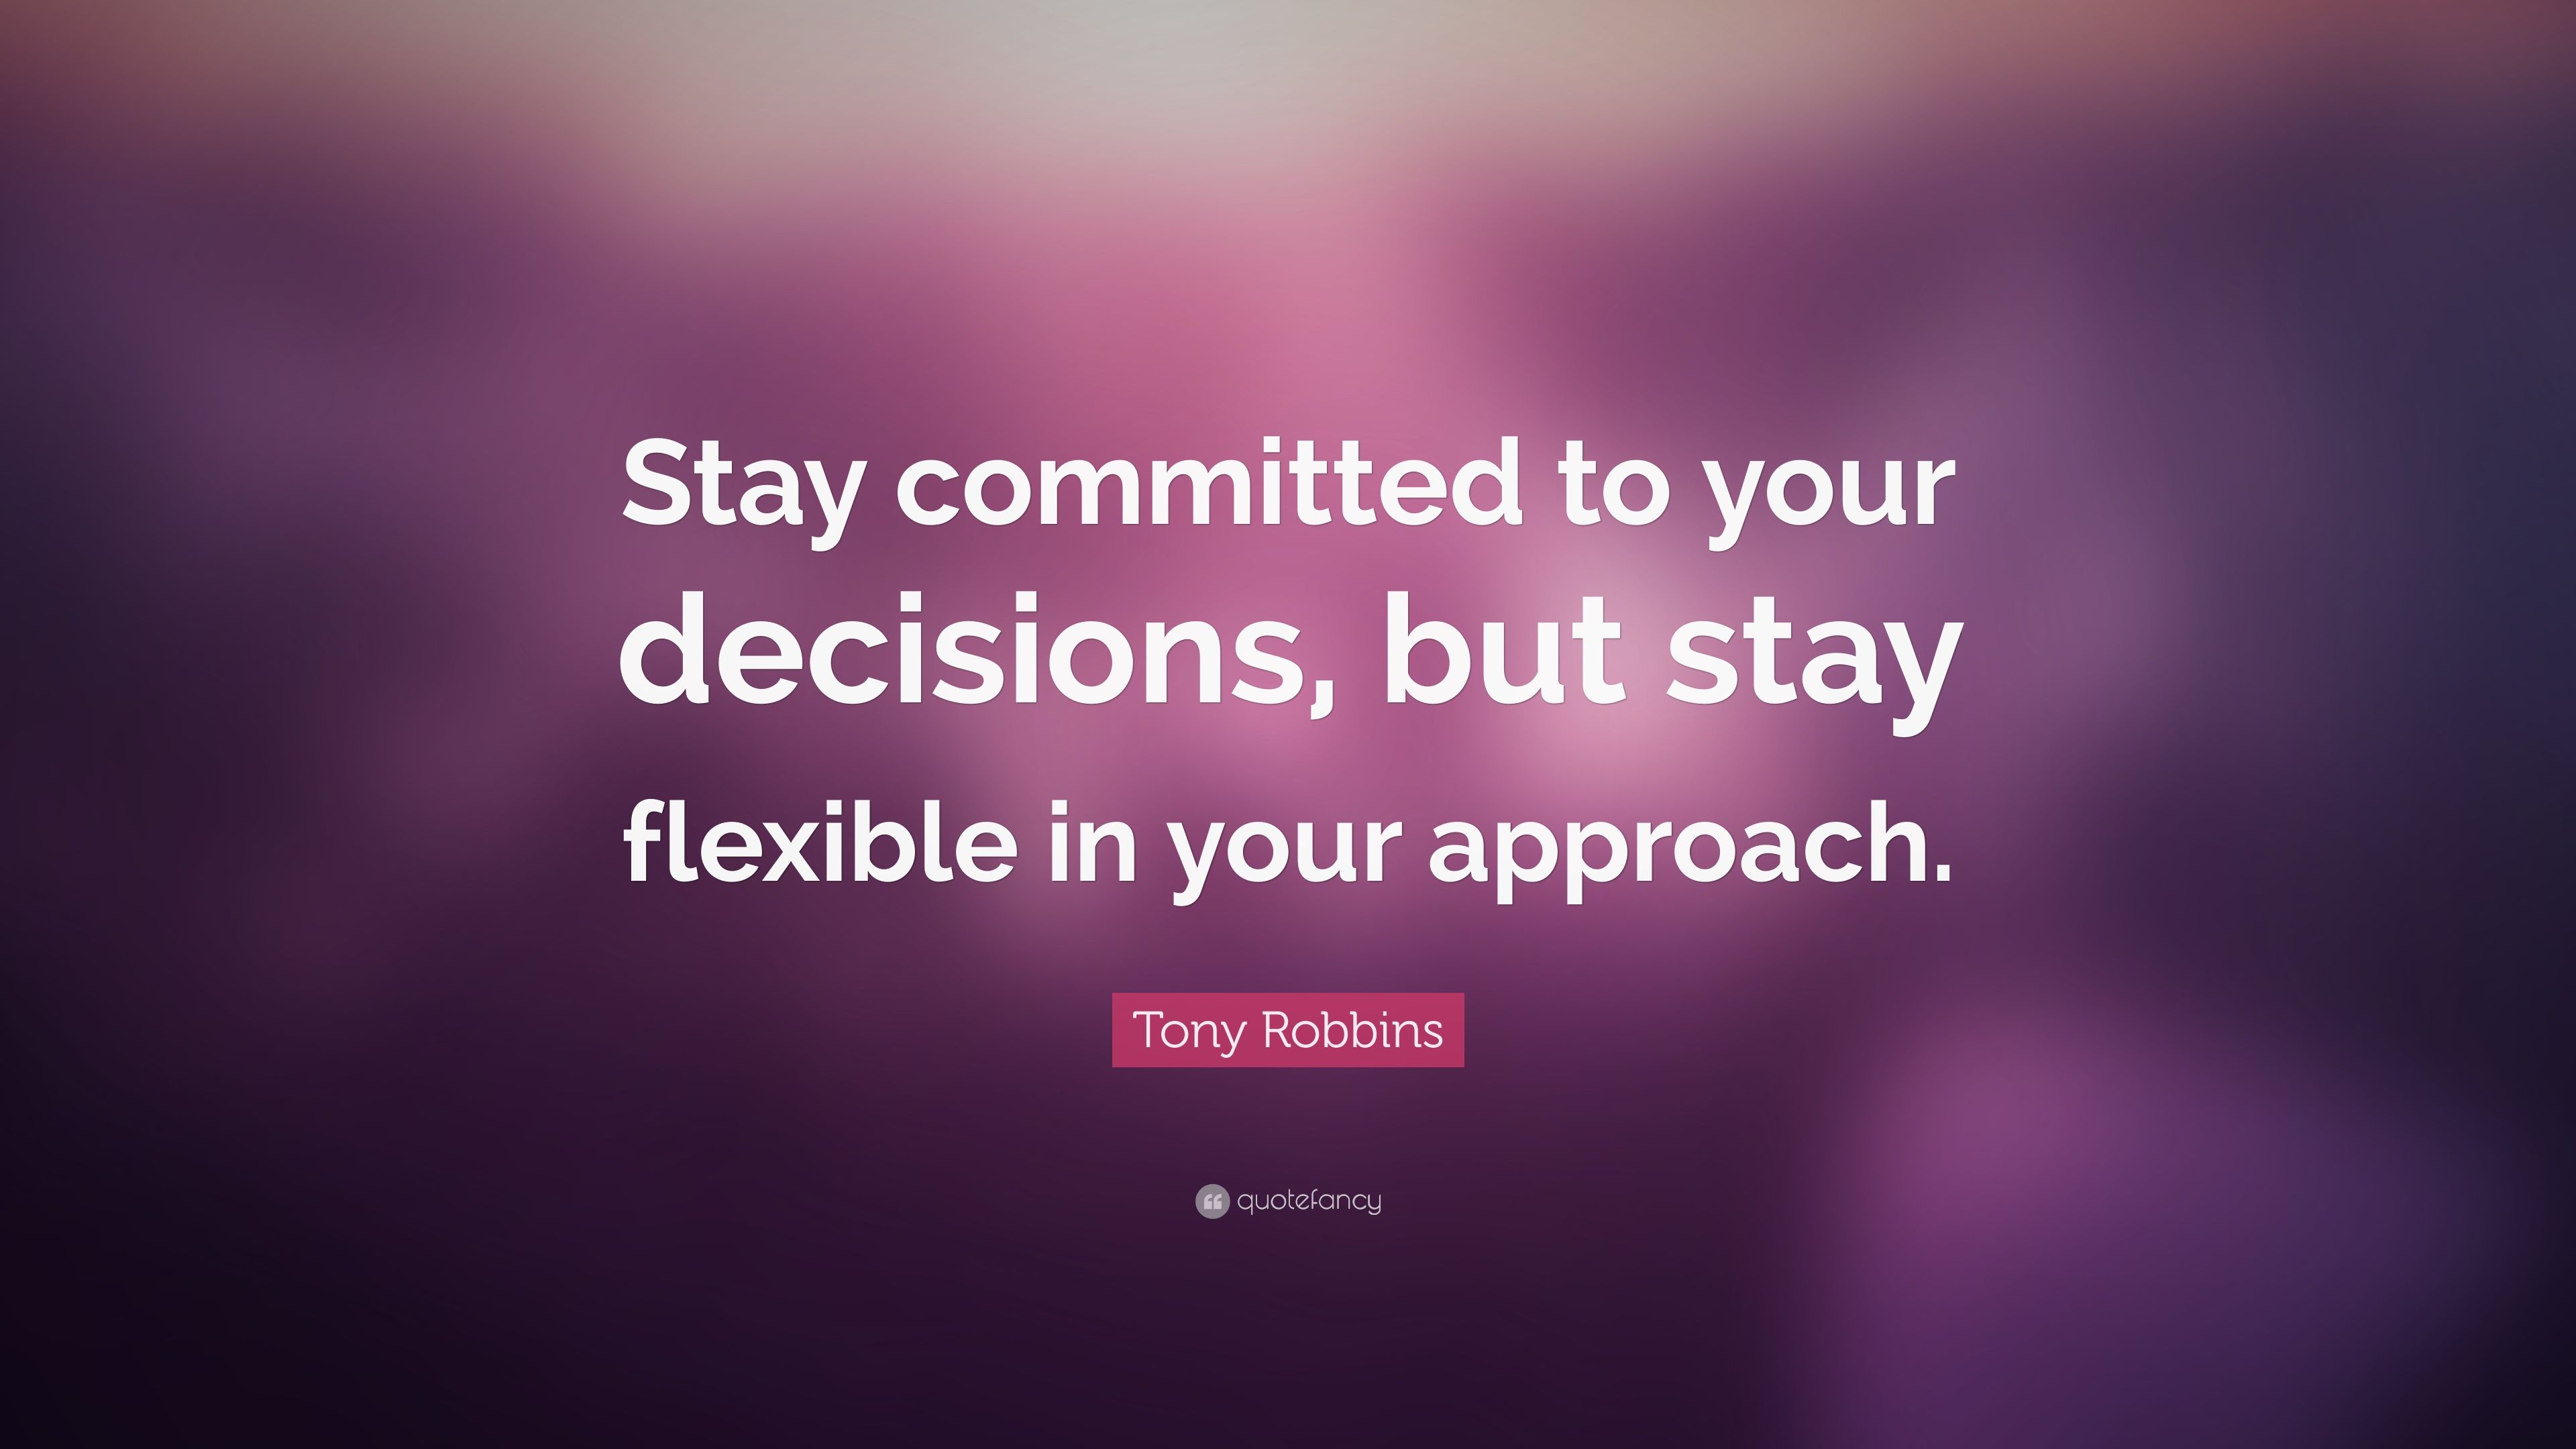 Tony Robbins Quote: “Stay committed to your decisions, but stay